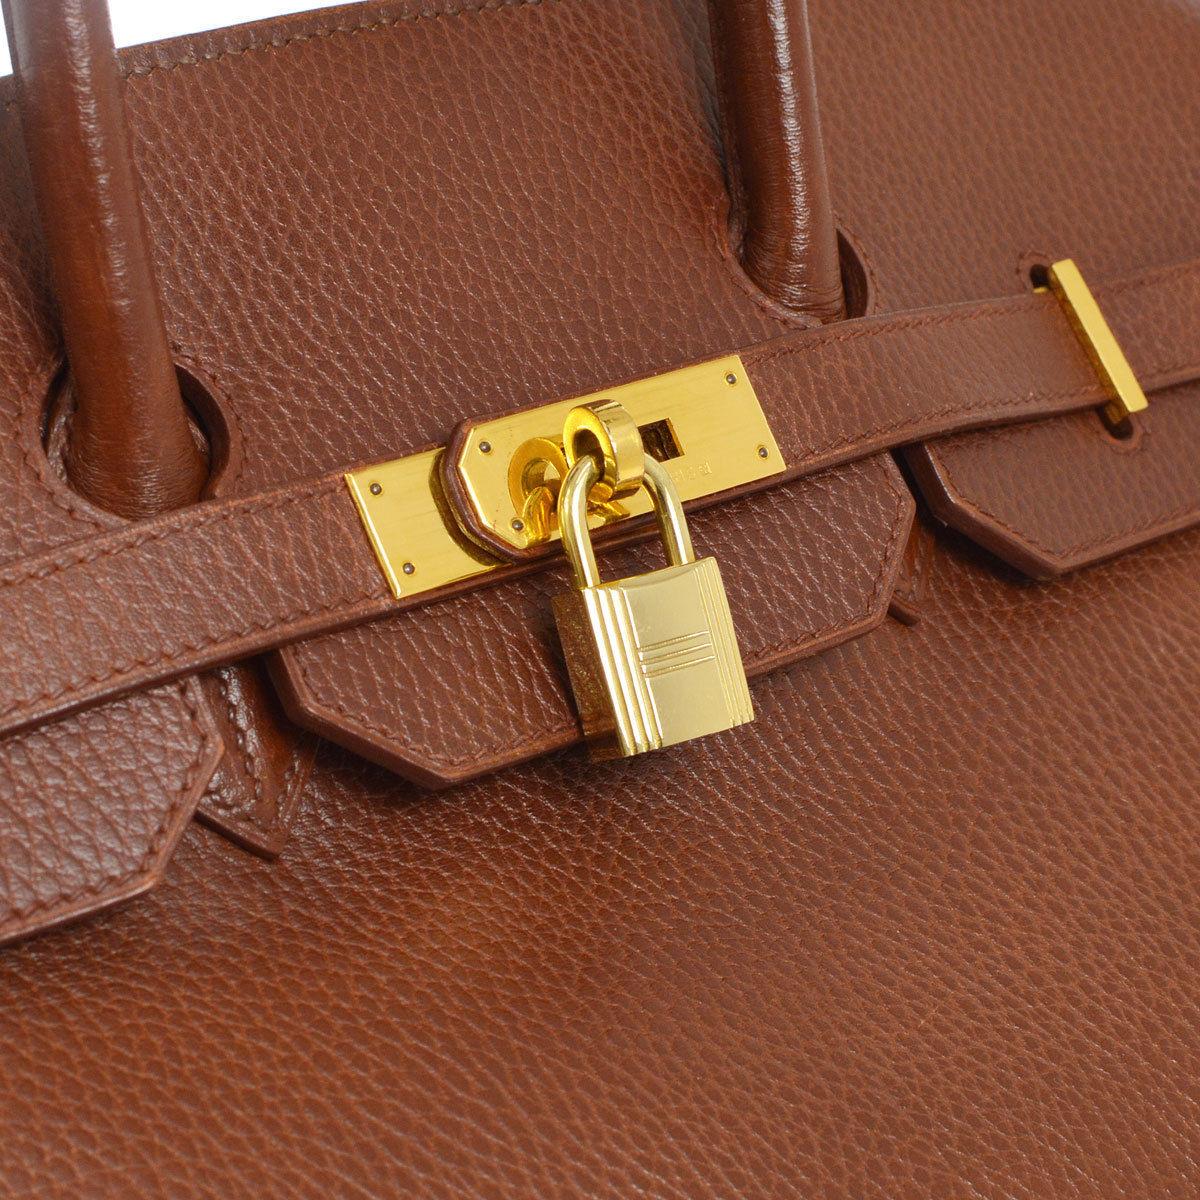 Hermes Birkin 35 Chocolate Brown Leather Silver Gold Carryall Travel Top Handle Satchel Tote

Leather
Gold tone hardware
Leather lining
Date code present
Made in France
Handle drop 4.25